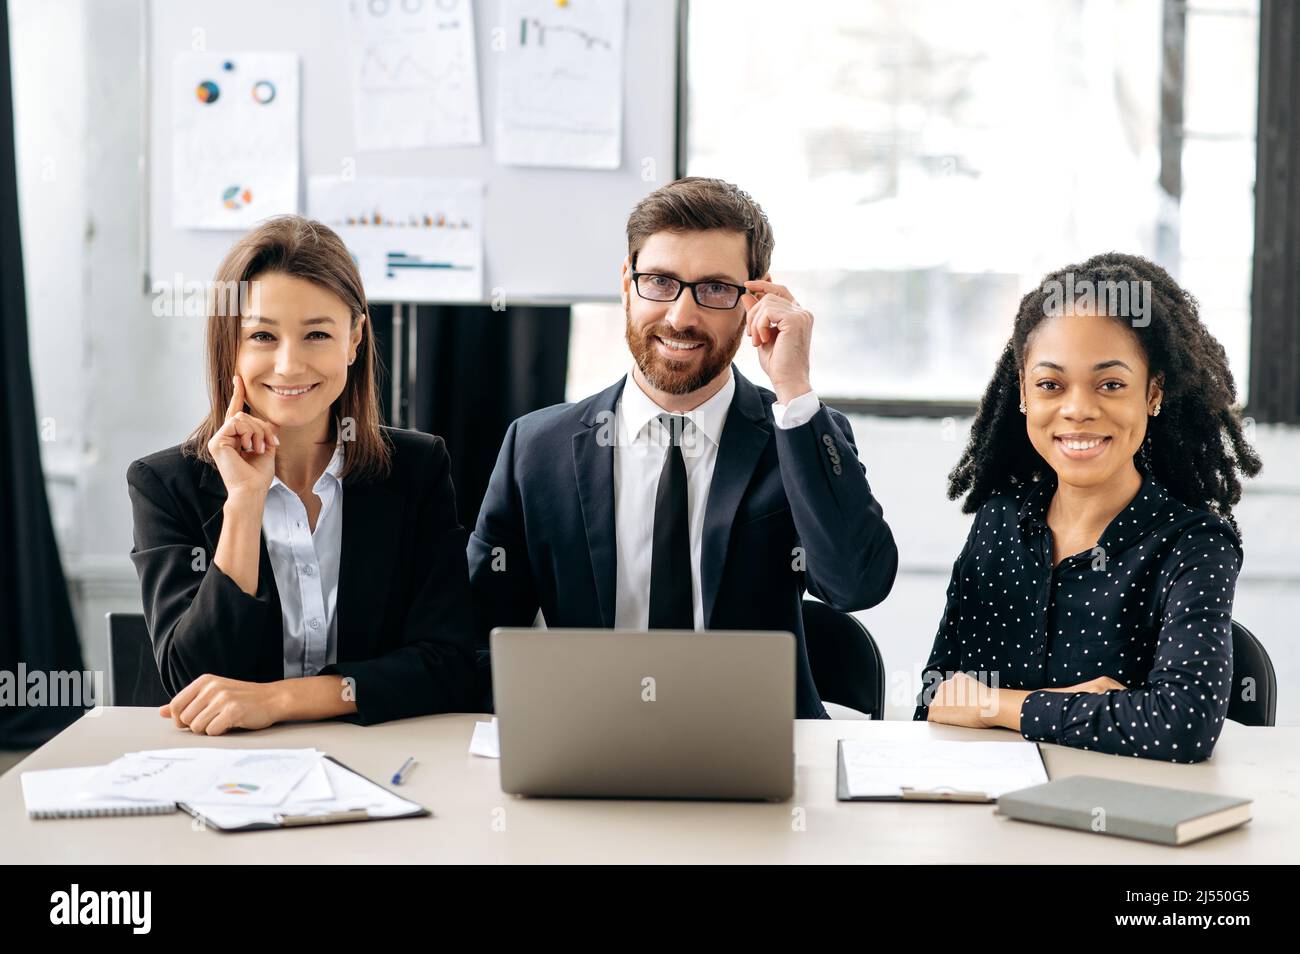 Teamwork, collaboration concept. Multiracial influential business people in formal wear look at the camera, smiling. Elegant creative colleagues sitting in modern office, working together on project Stock Photo